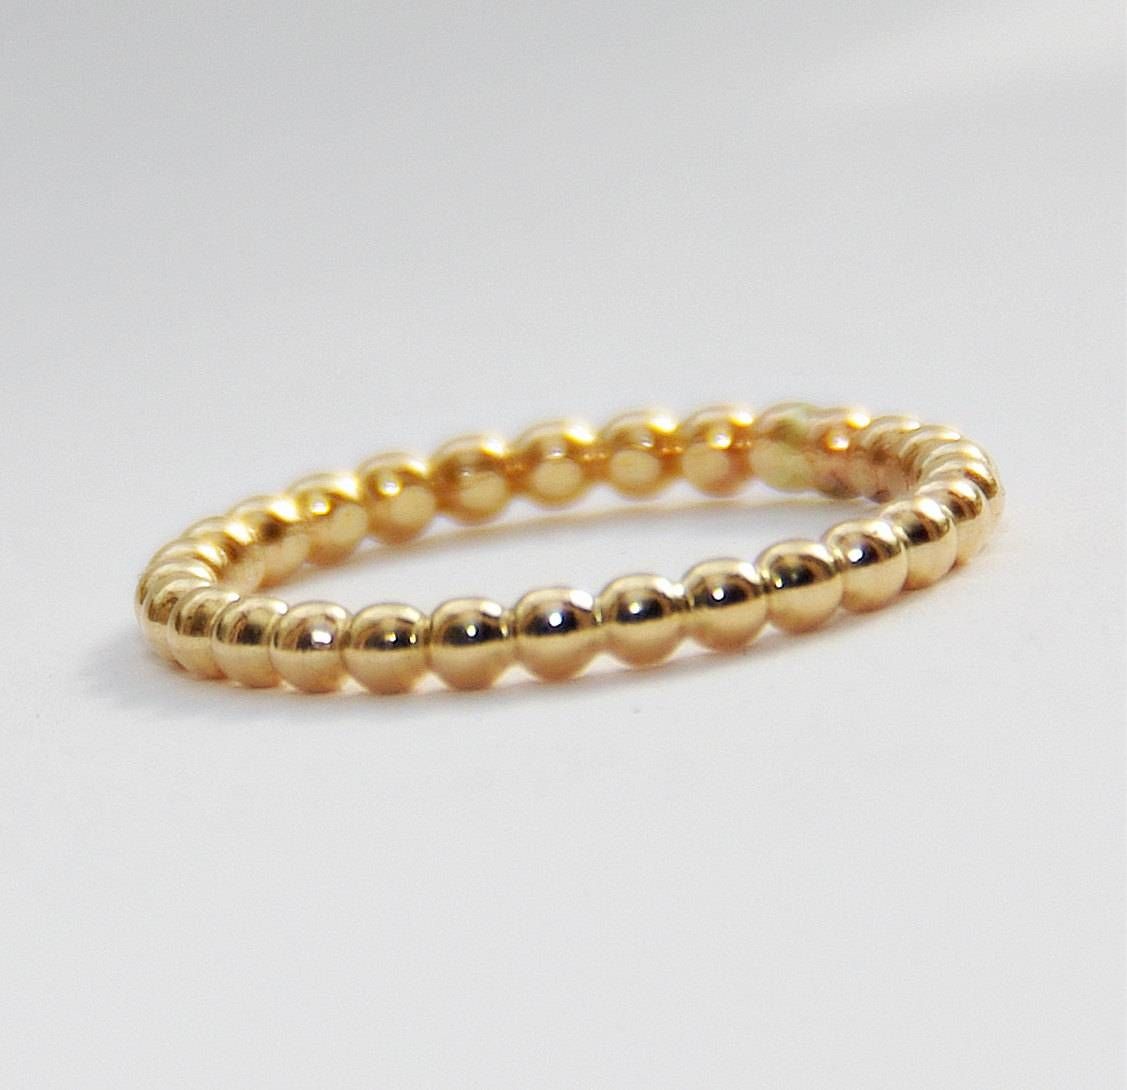 2mm Bold Yellow Gold Filled Beaded Ring  Anniversary Ring  14k Pertaining To 2017 Gold Anniversary Rings (View 12 of 25)